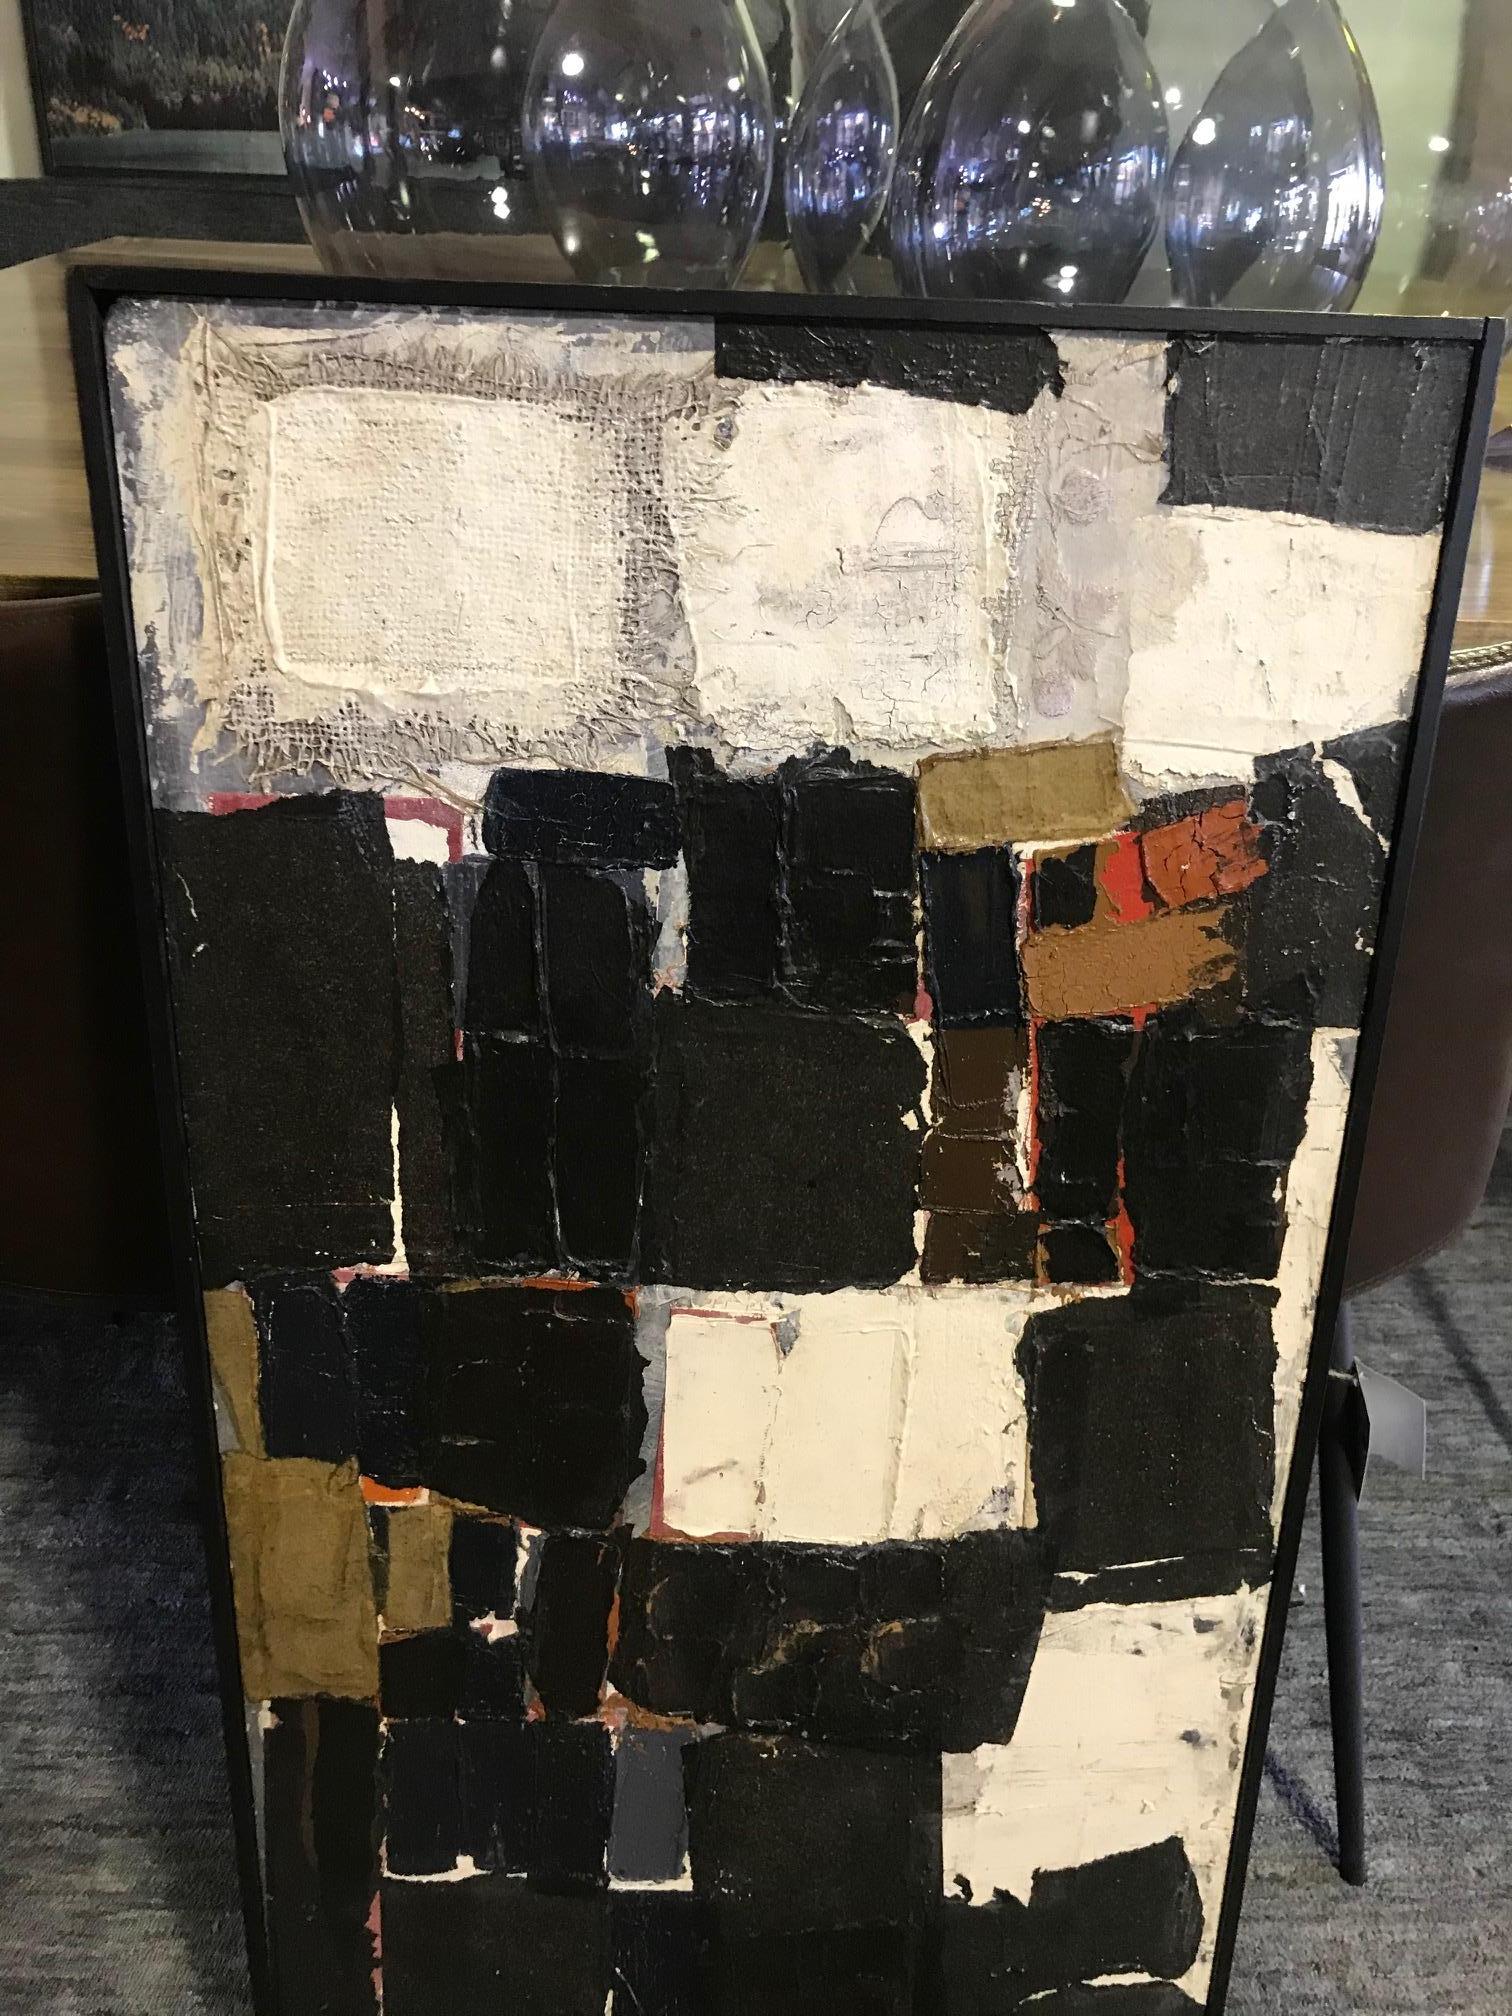 A fantastic midcentury mixed-media work by American artist Duayne Hatchett.

Signed and dated (1956) on the backside by the artist. 

Hatchett's work can be found in the Smithsonian American Art Museum amongst others. His work was also shown in